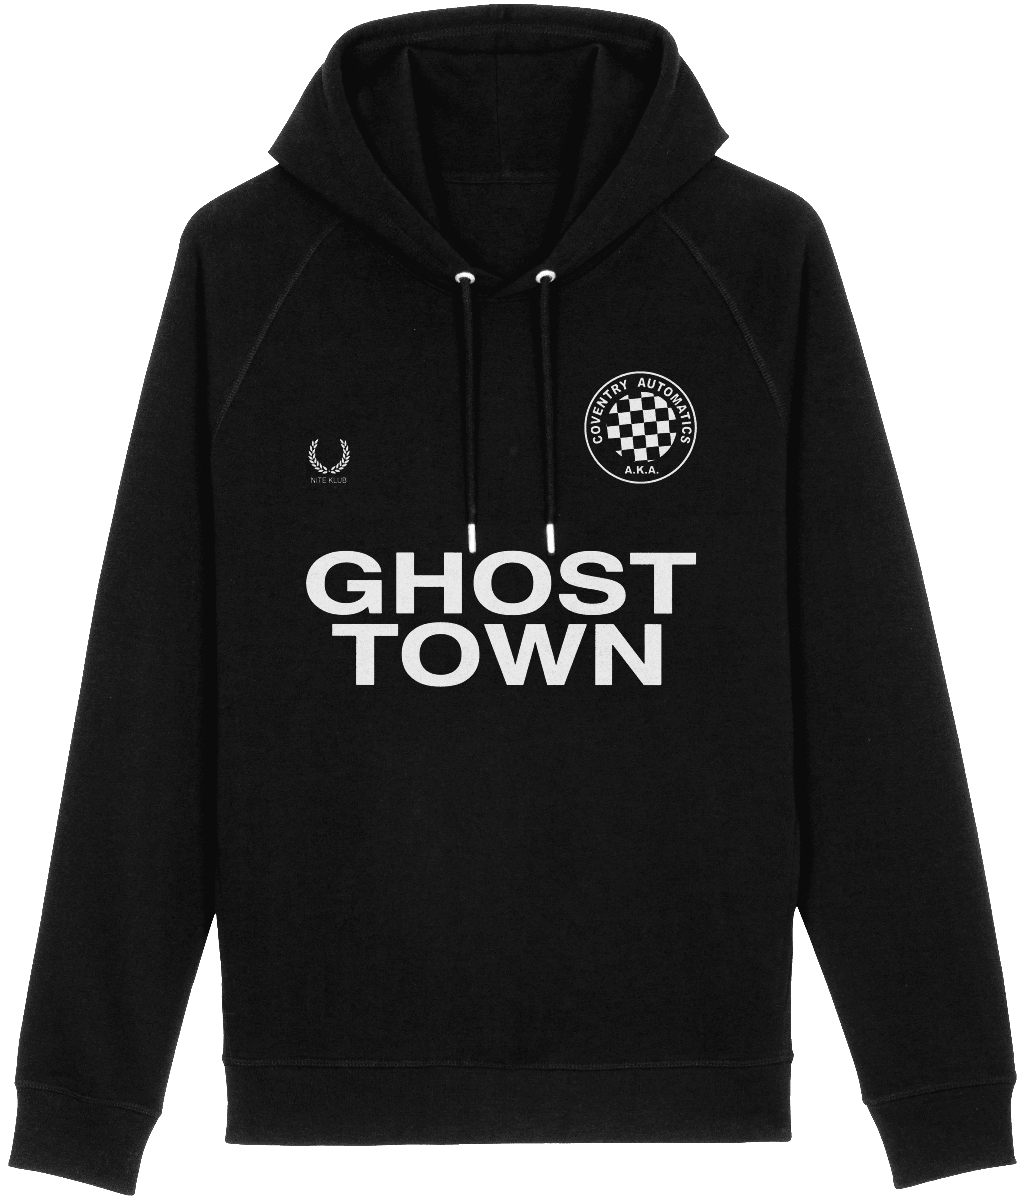 AKA COVENTRY AUTOMATICS : Premium Quality Hoodie Inspired by The Specials & Football Shirts - SOUND IS COLOUR